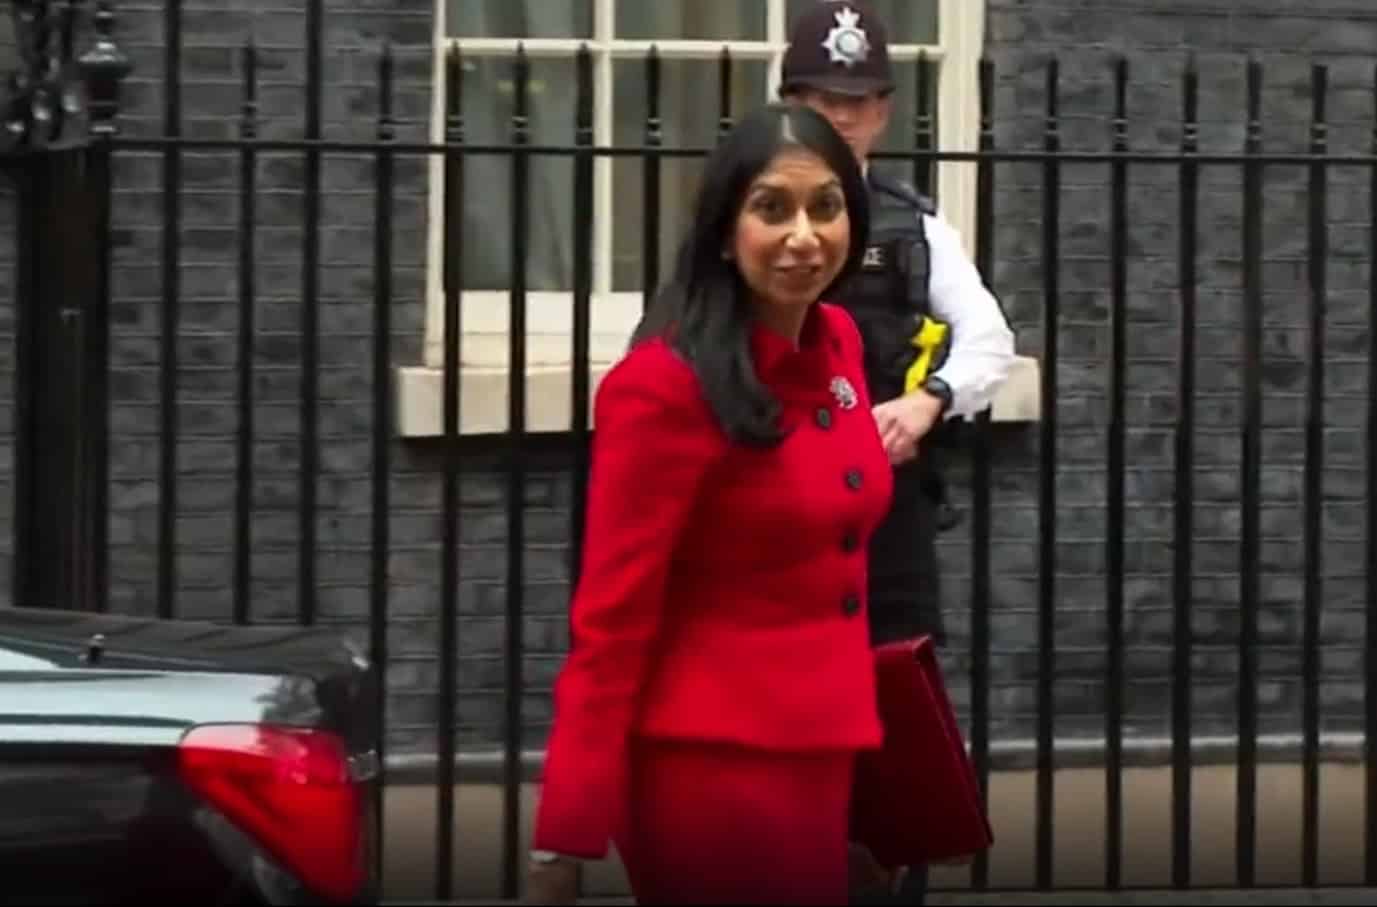 Braverman fires back at journalists outside Number 10 as she faces calls to resign